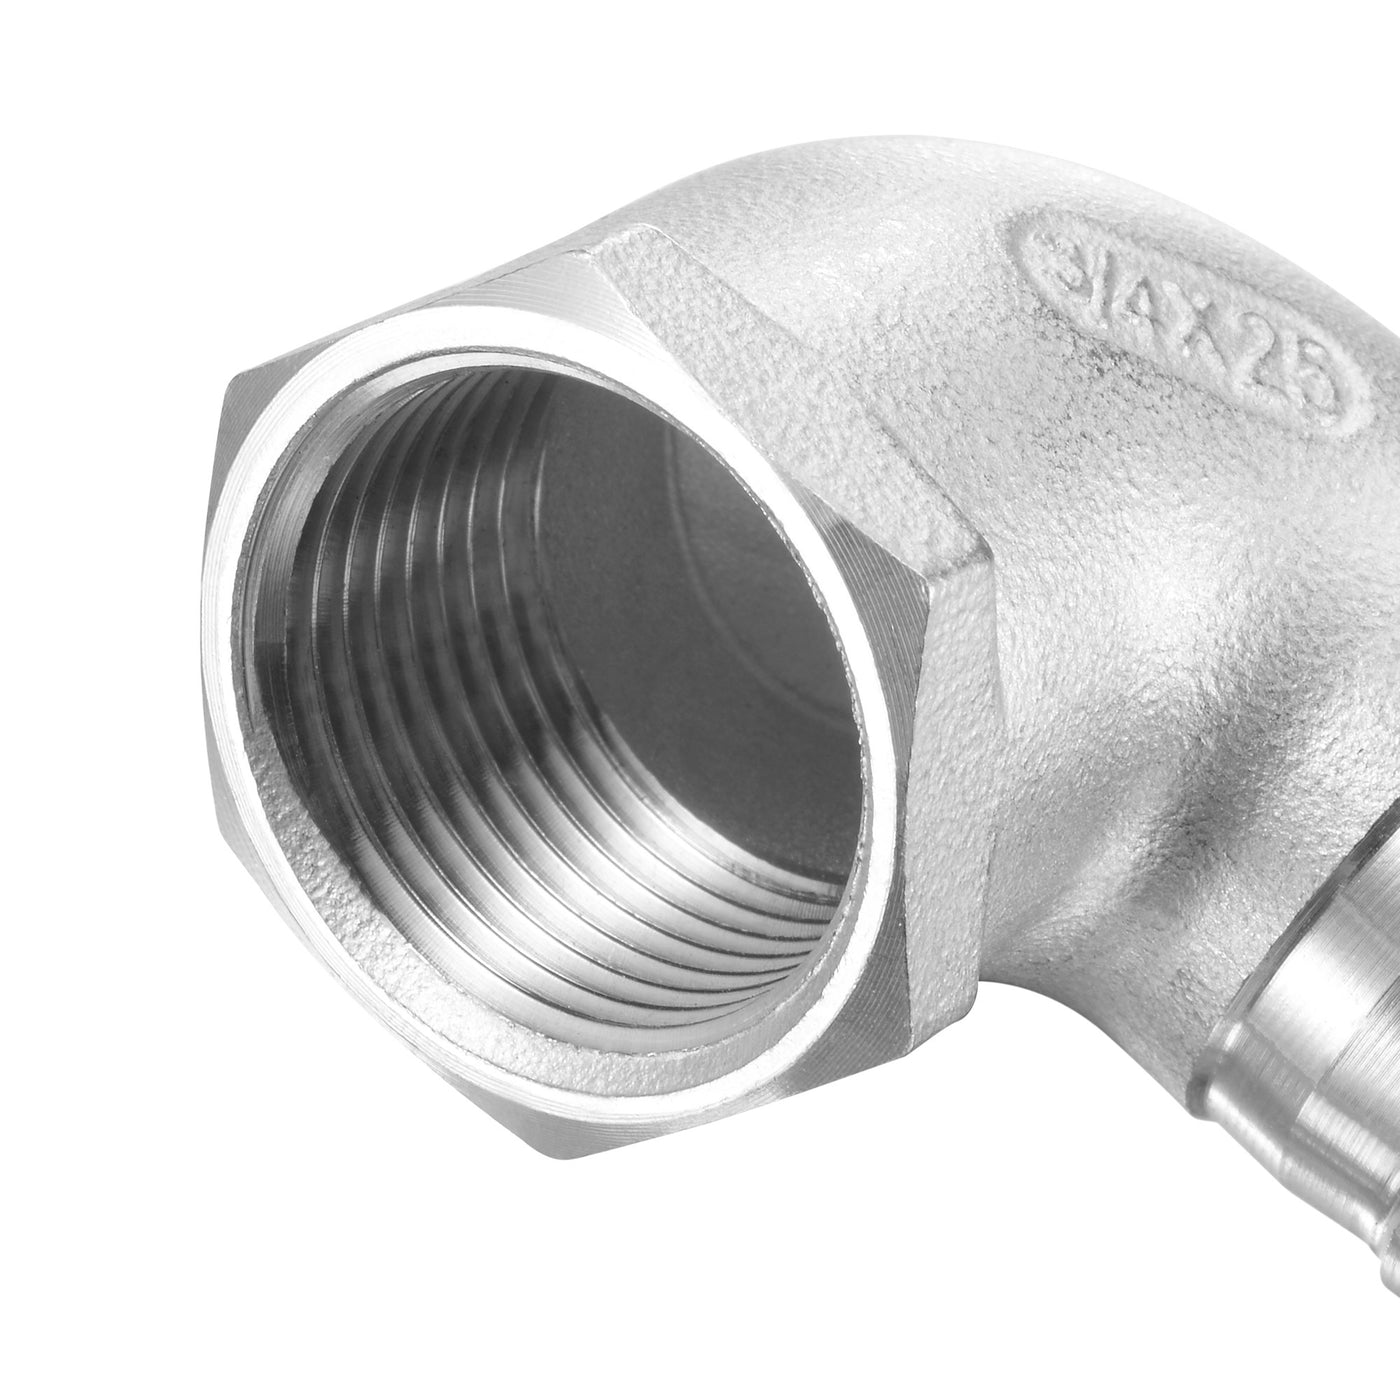 Uxcell Uxcell Stainless Steel Hose Barb Fitting Elbow 25mm x 3/4" NPT Female Pipe Connector